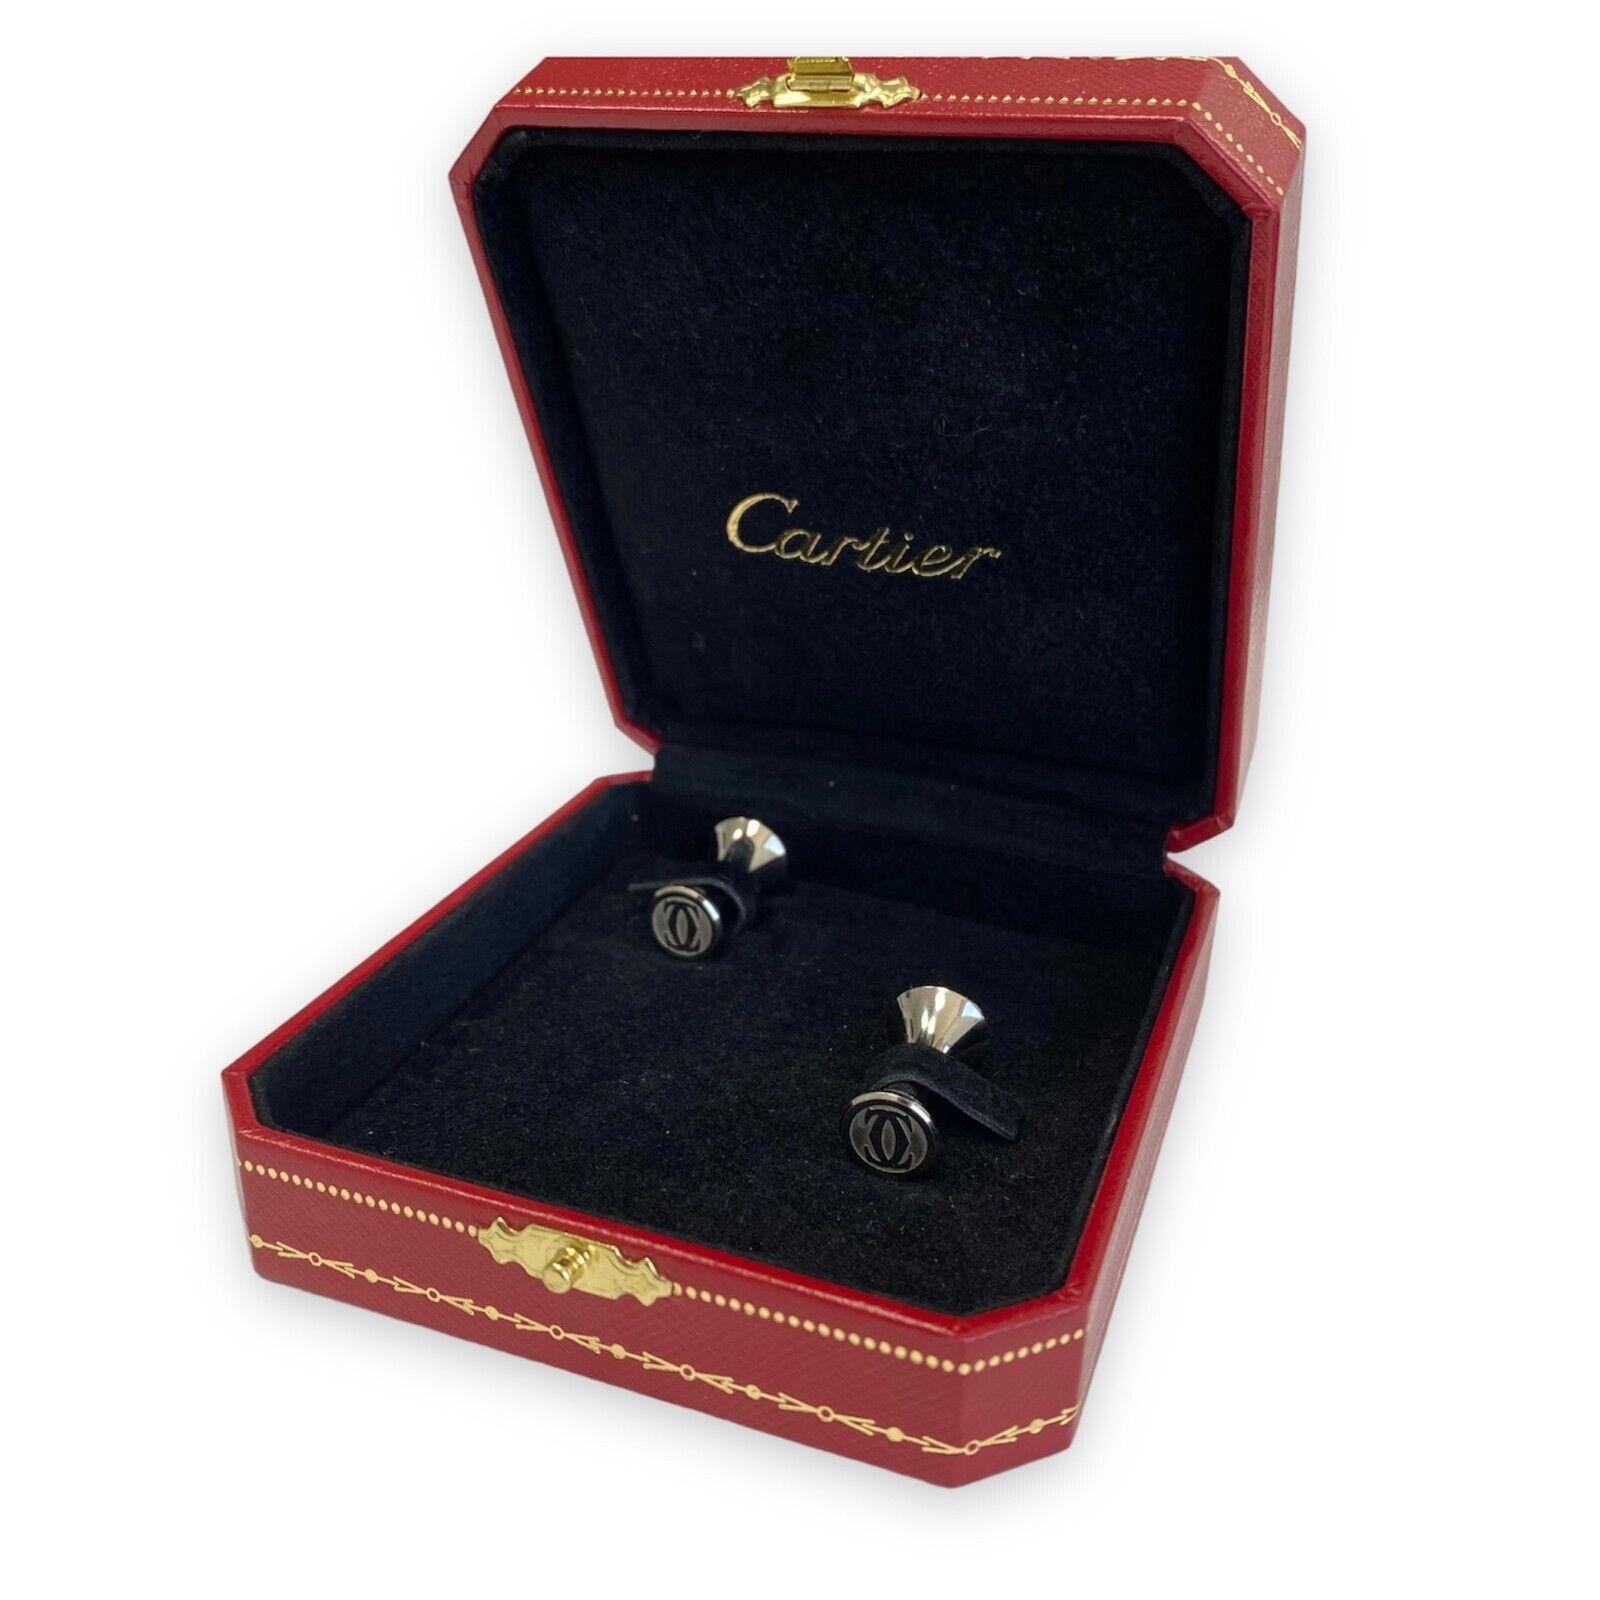 Item 
specificsCondition
New without tags
Seller Notes
“New, never been used; comes with the original box”
Brand Cartier
Type Cufflinks
Department Men
Color Silver
Base Metal Silver
Country/Region of Manufacture France
Country of Origin France

